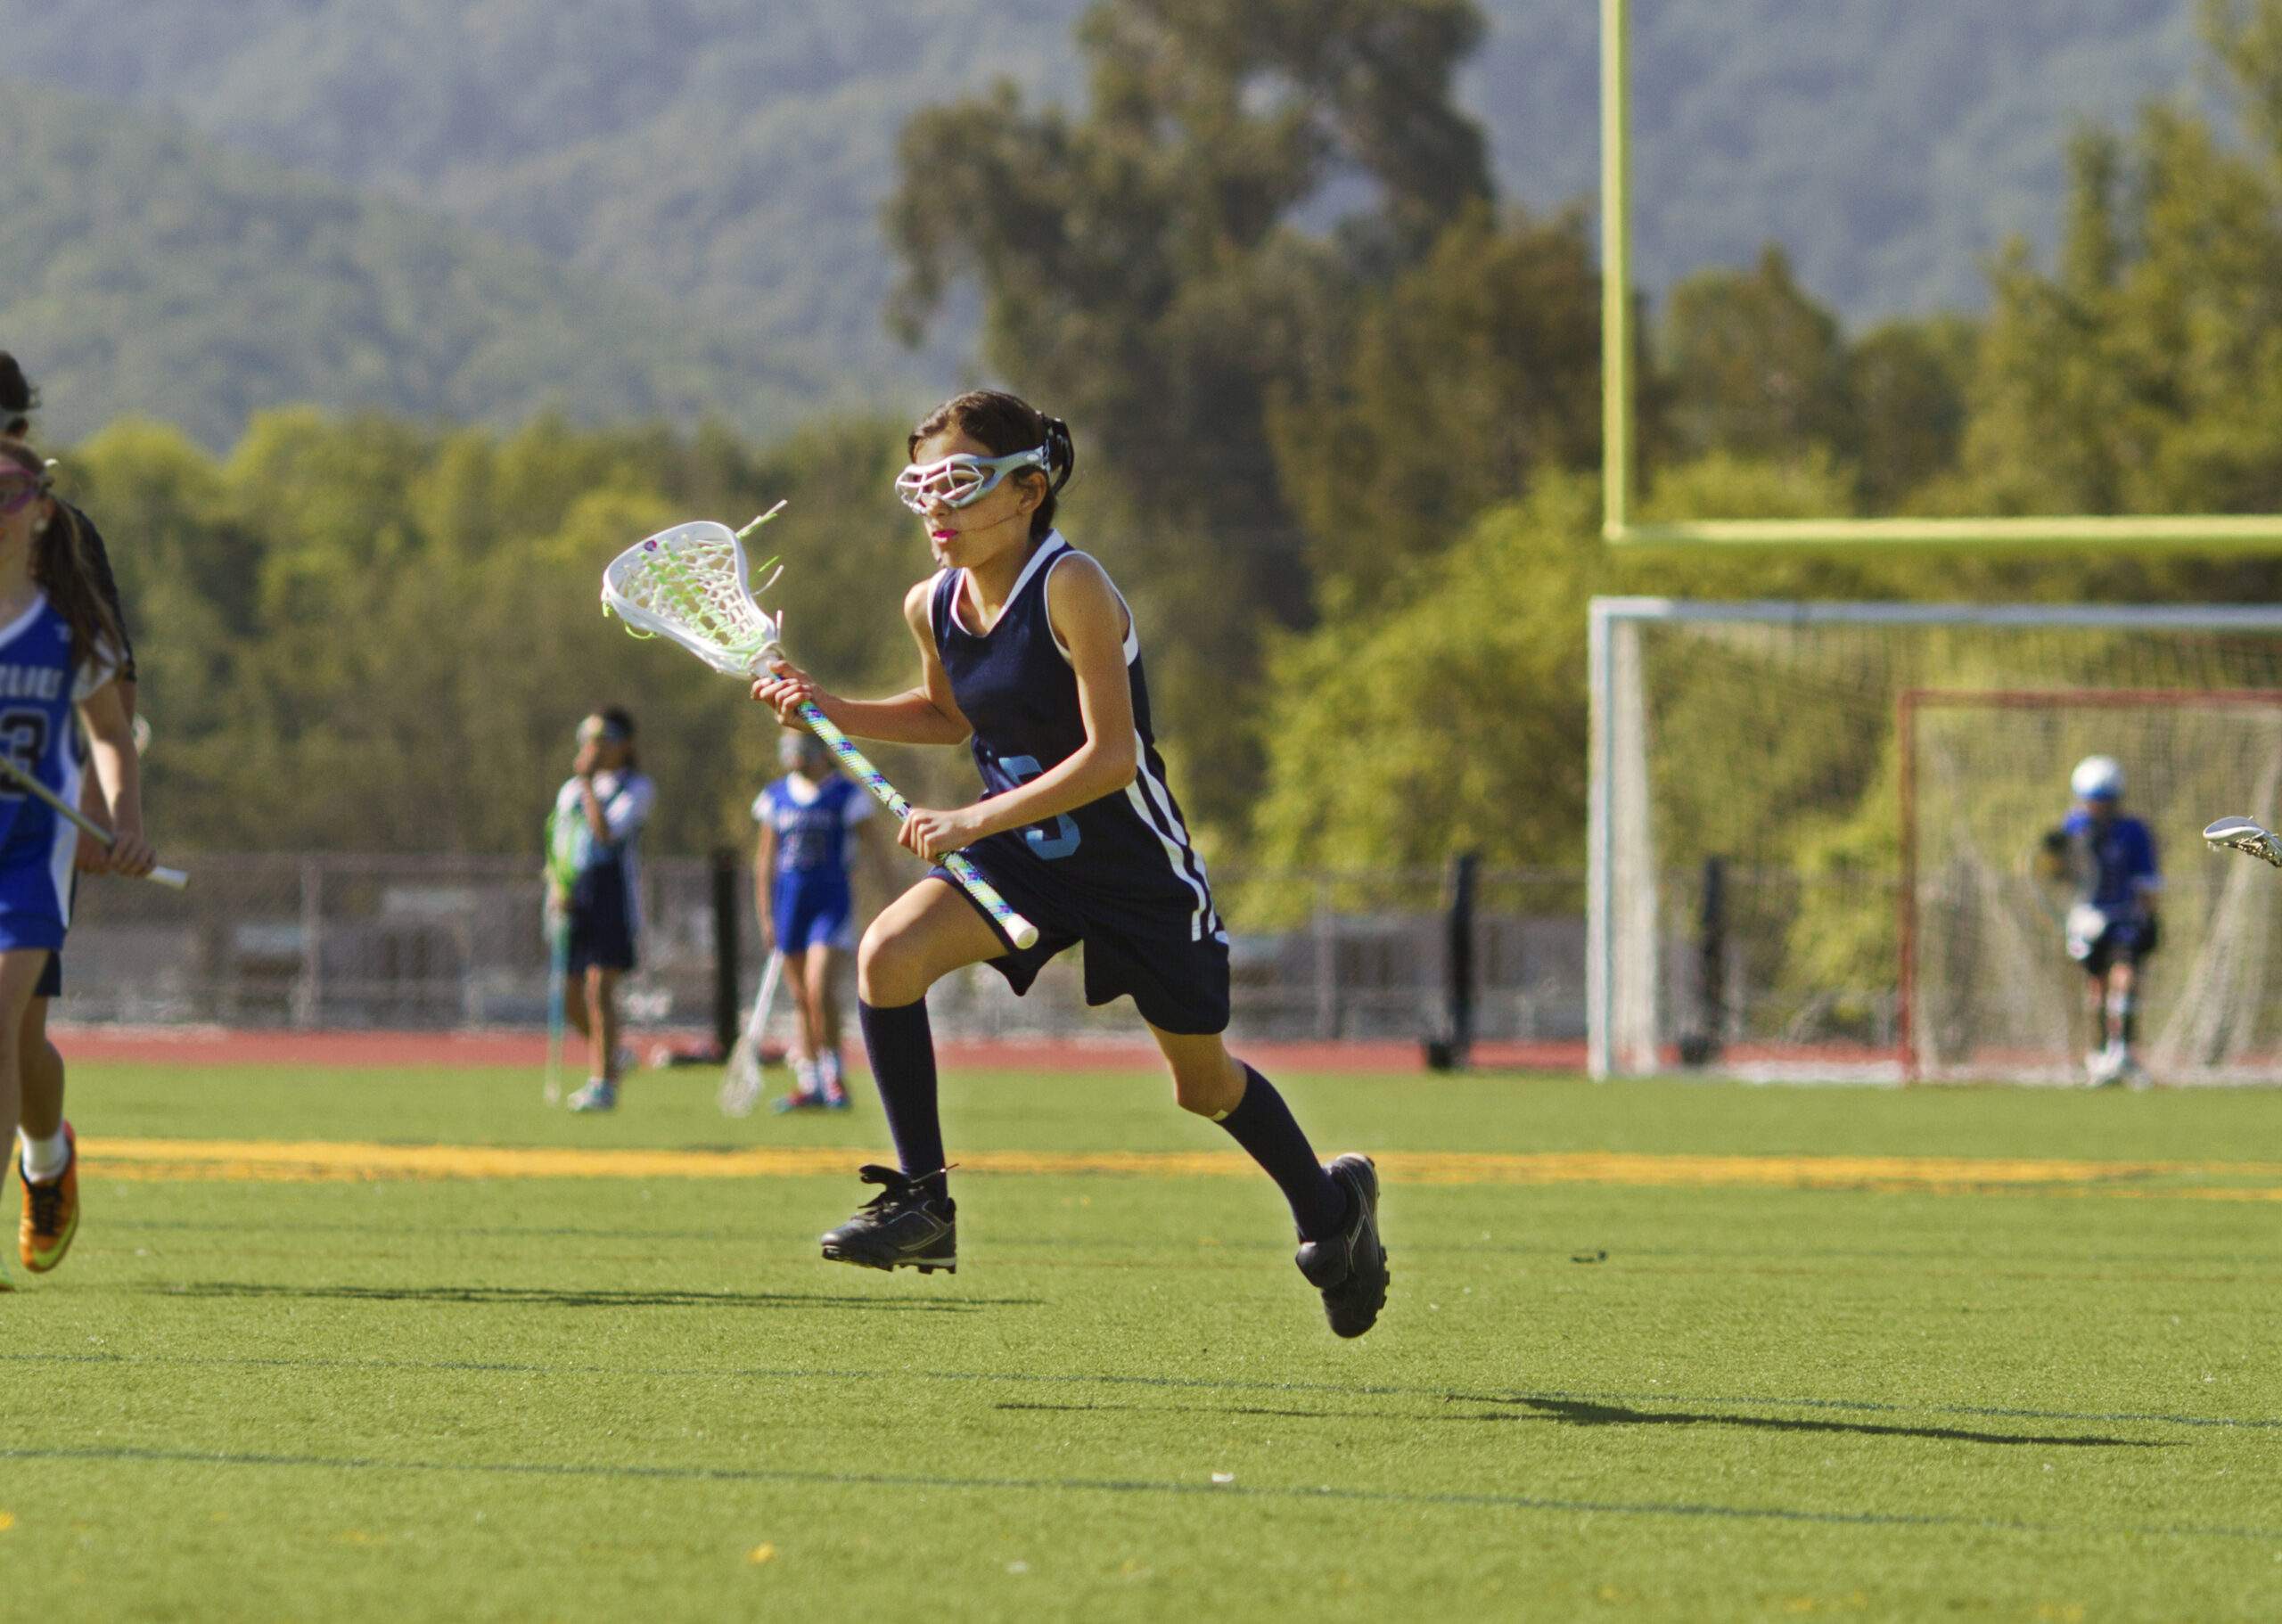 A young girl plays lacrosse.